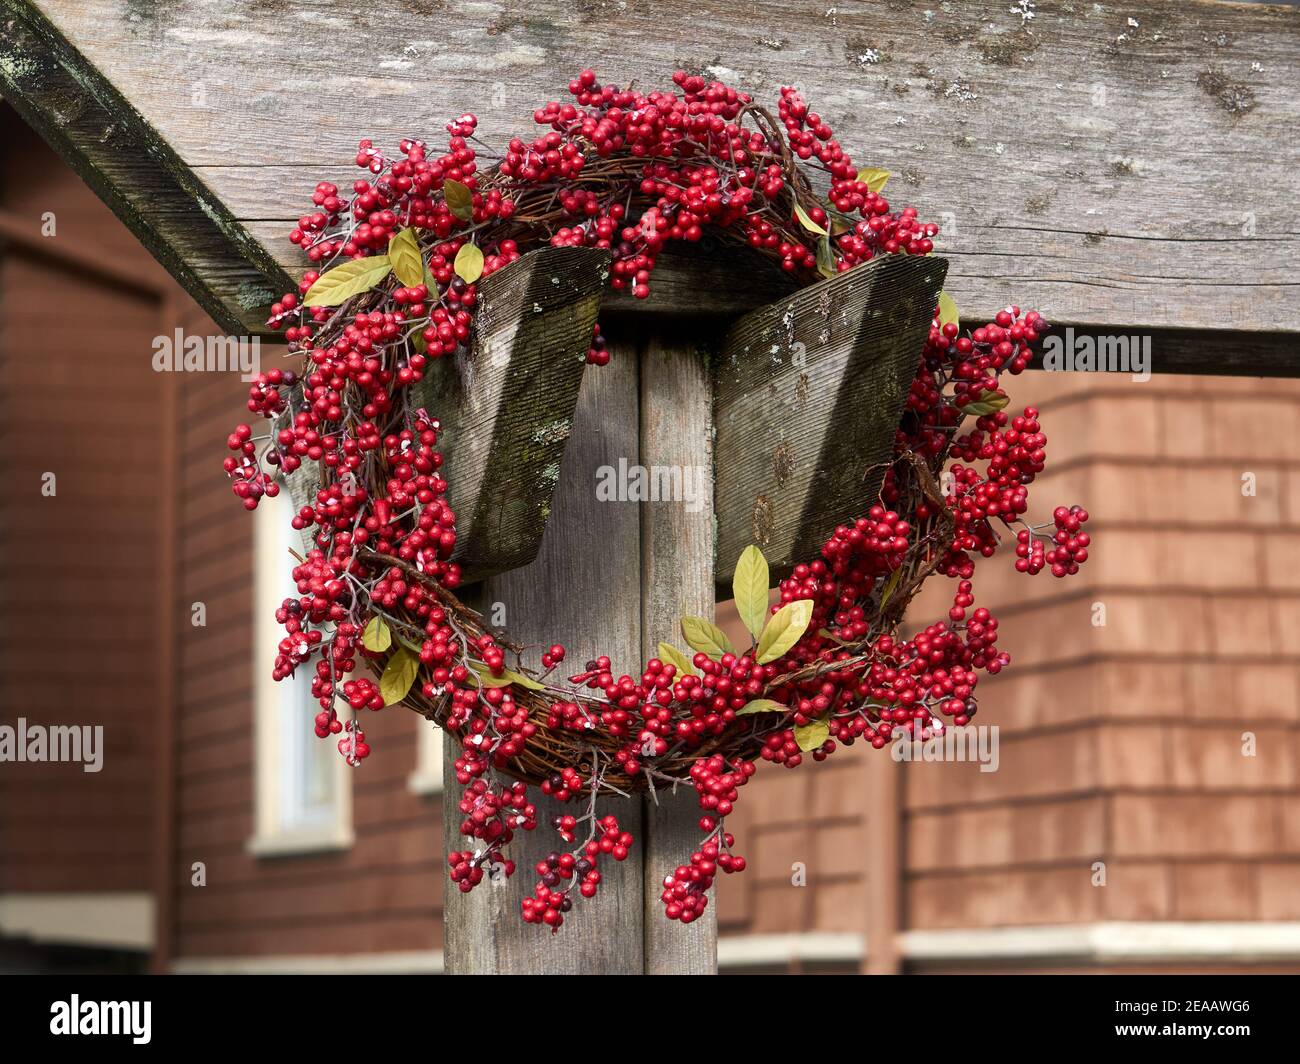 Outdoor holiday red berry wreath with rustic wooden house in background Stock Photo